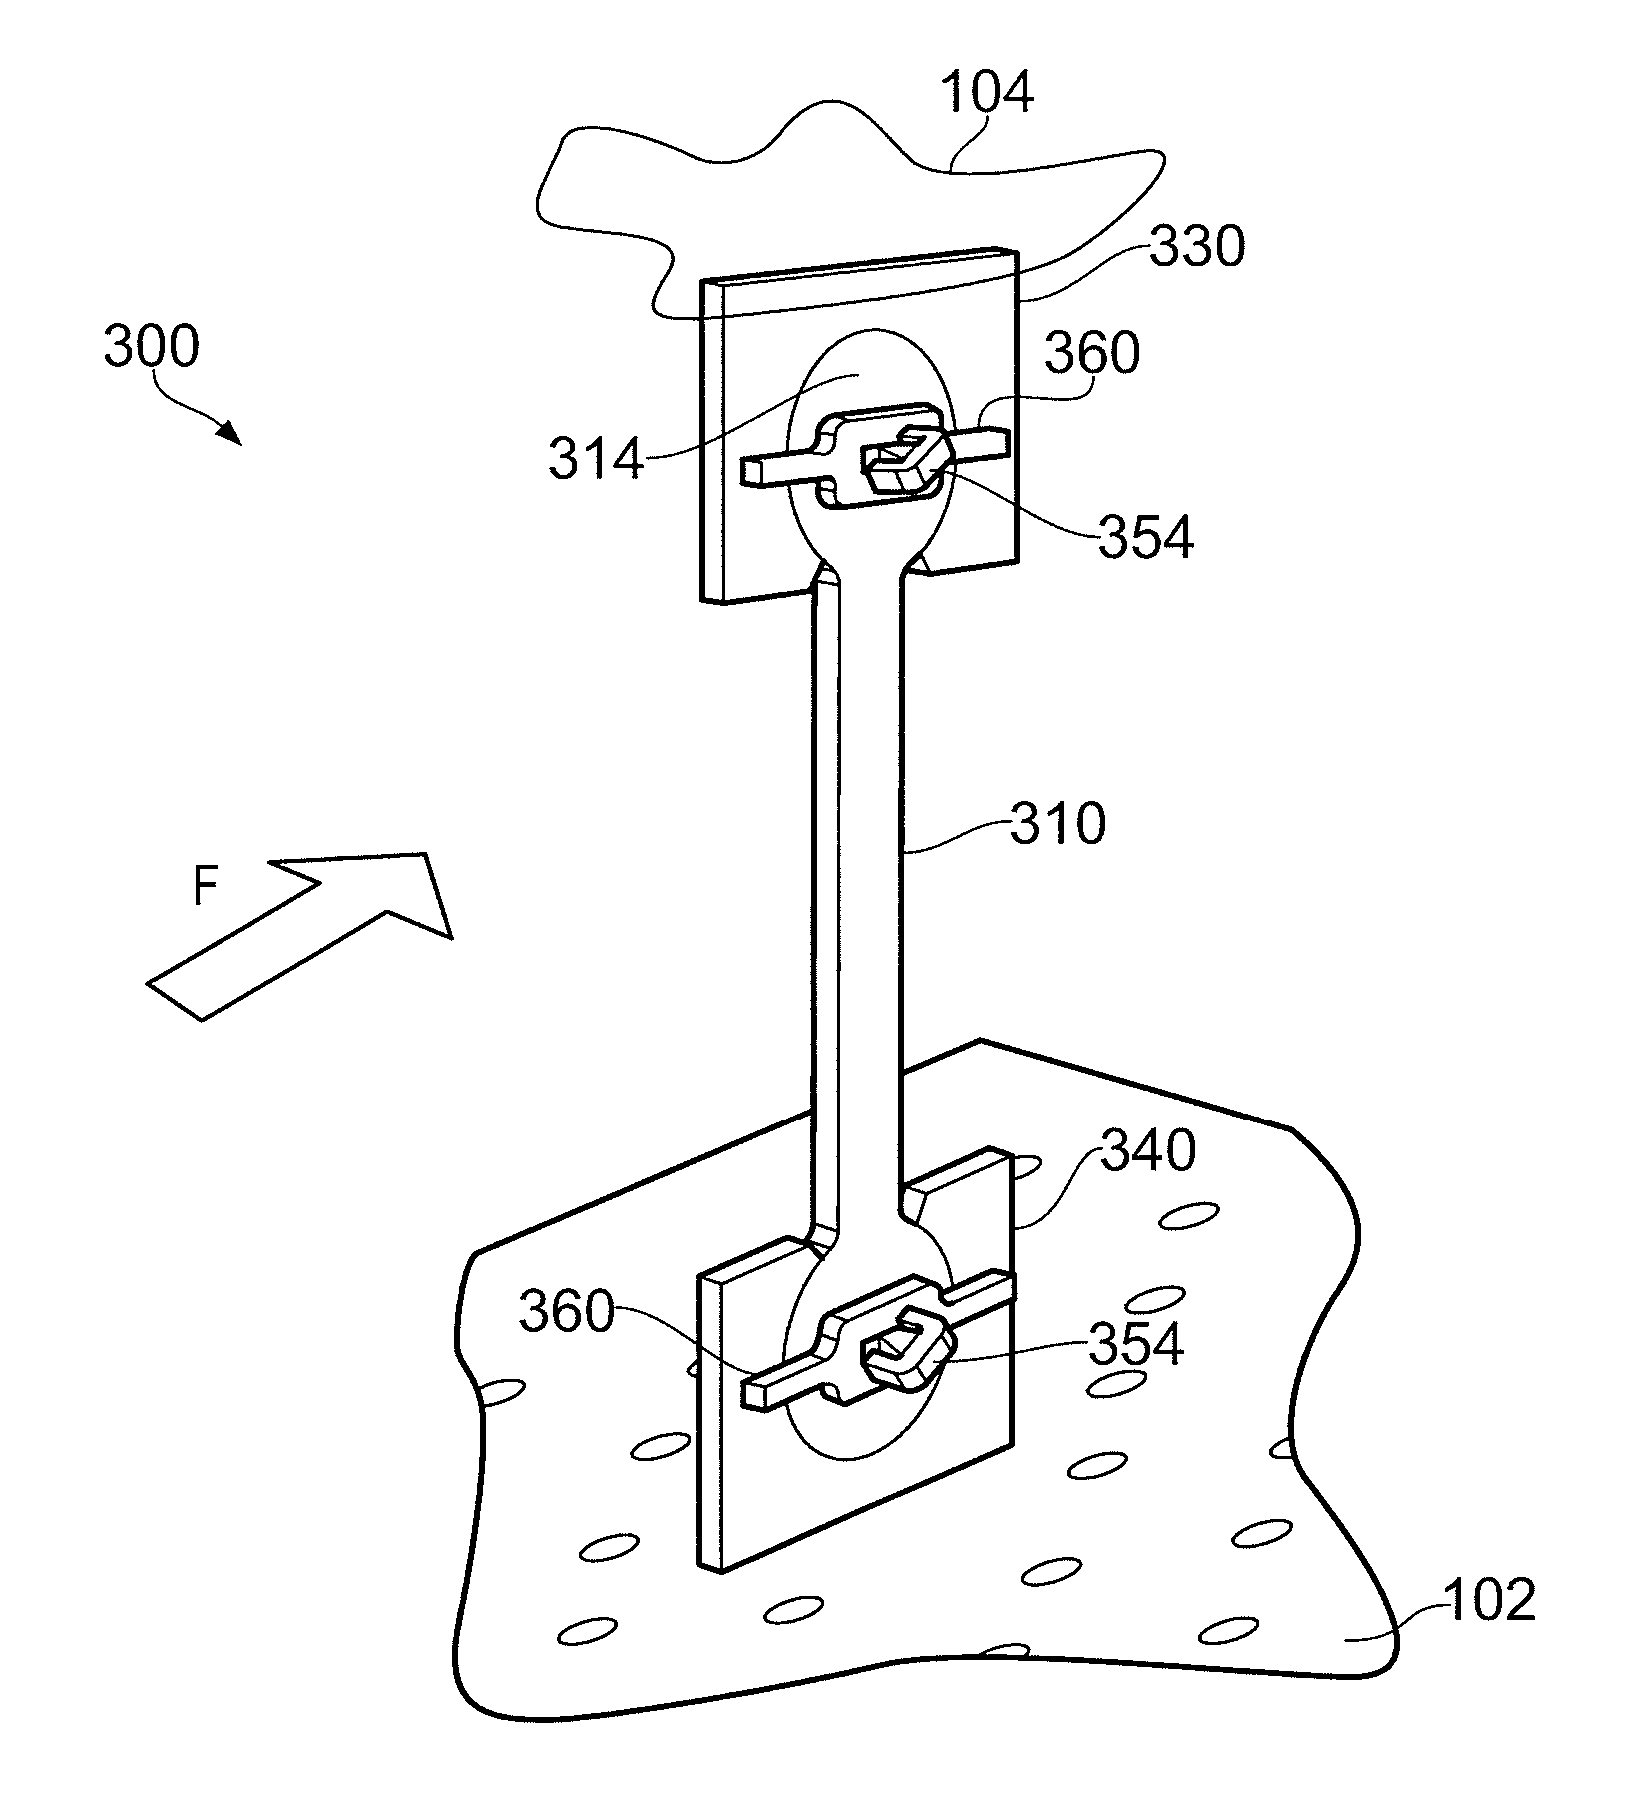 Panel connection system and a method of using the same